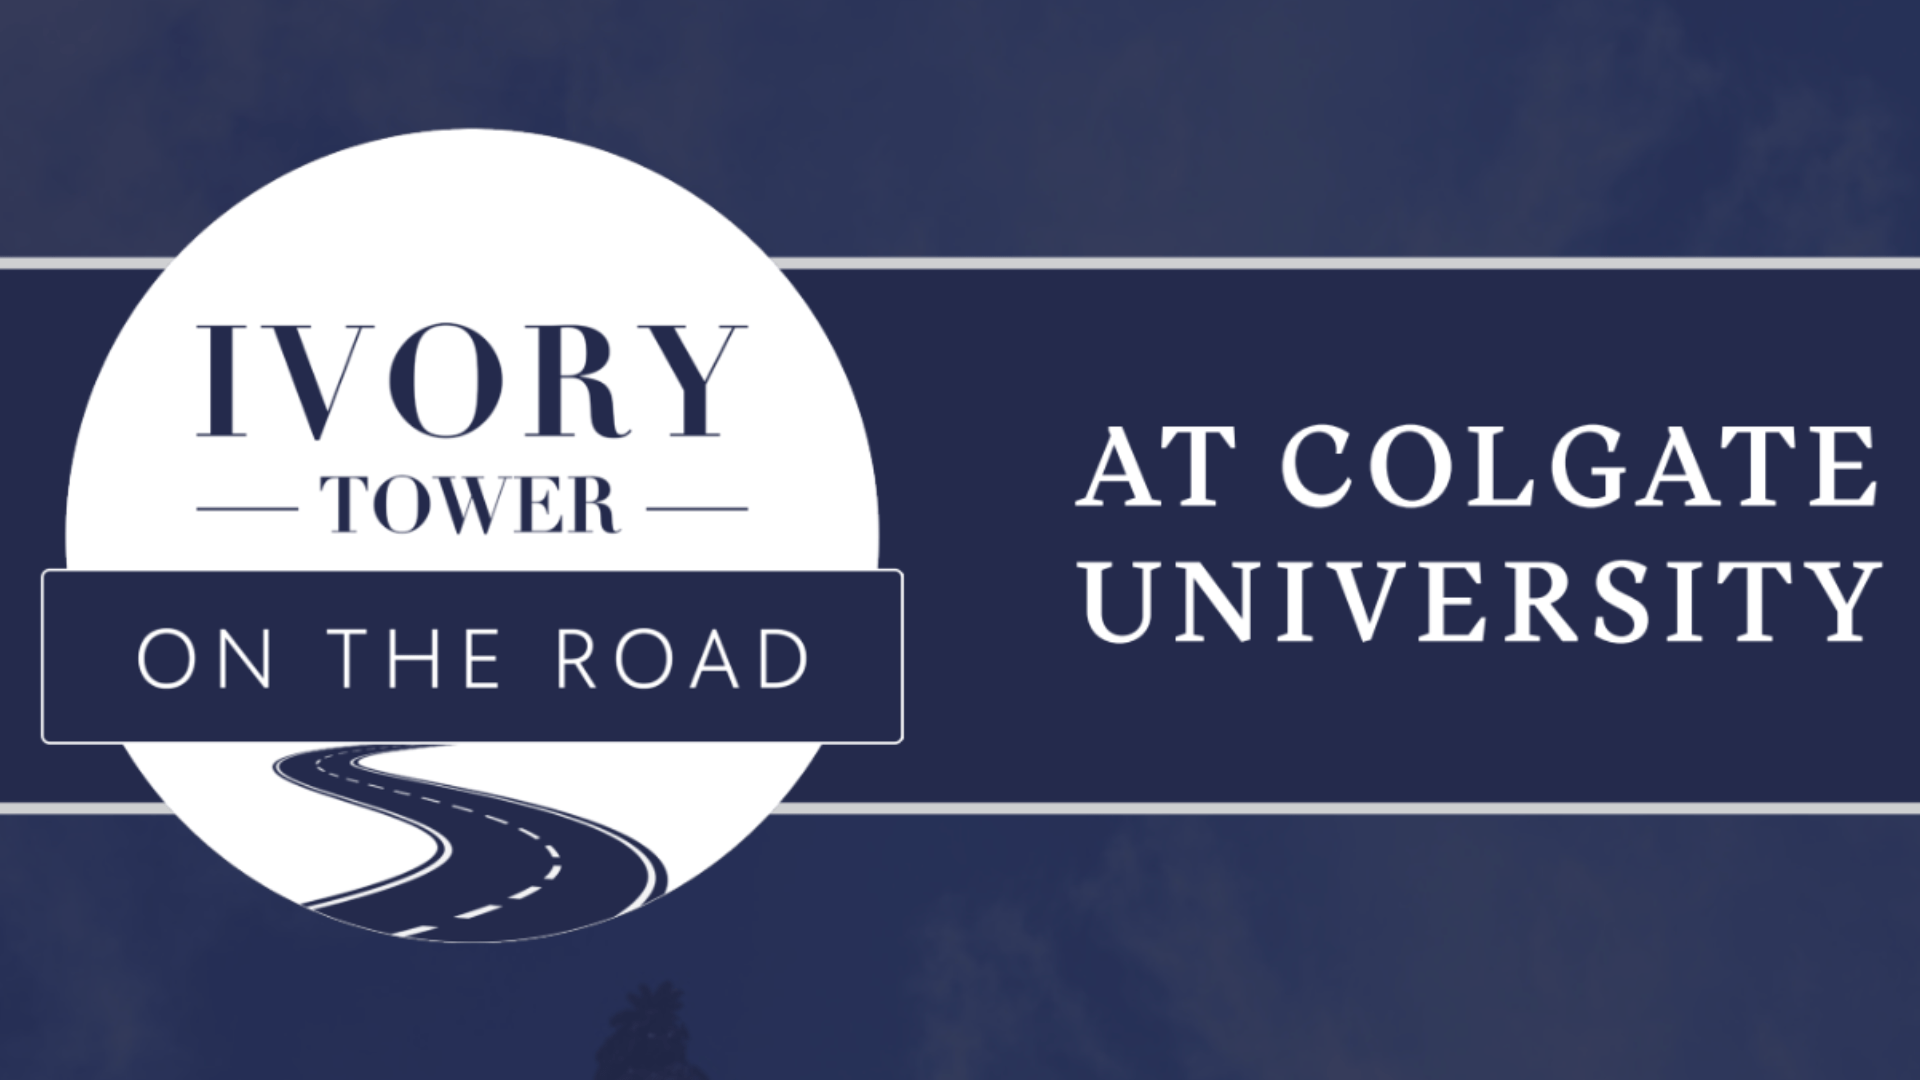 Ivory Tower on the Road at Colgate University on blue